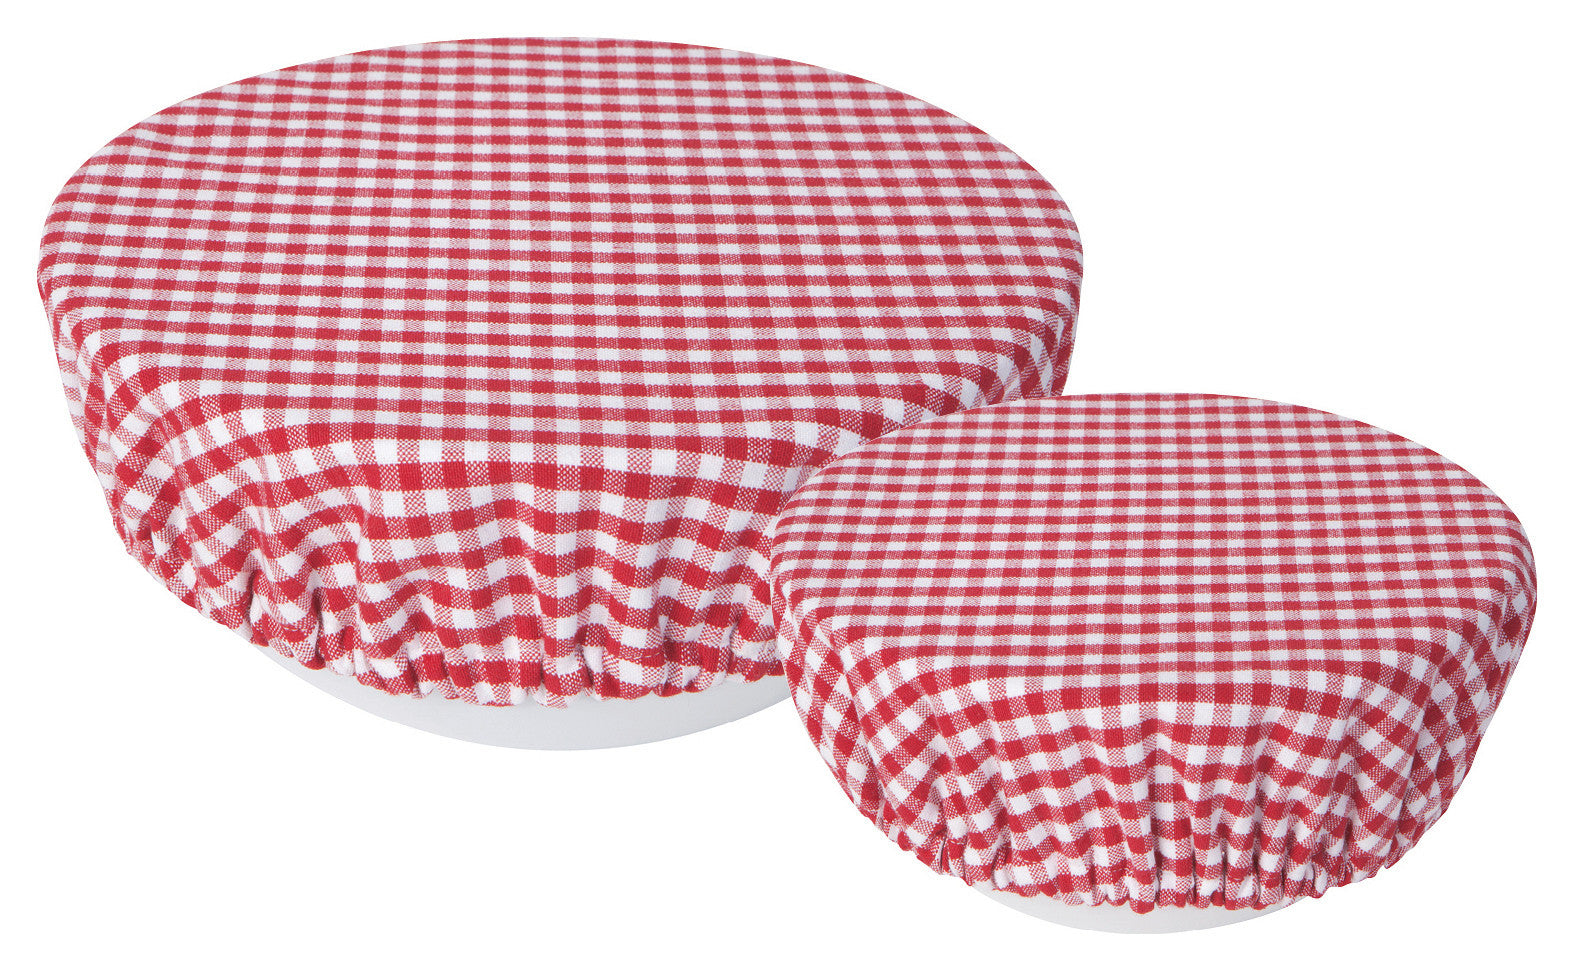 Bowl Covers: Set of Two - Red Gingham Danica - Oscar & Libby's